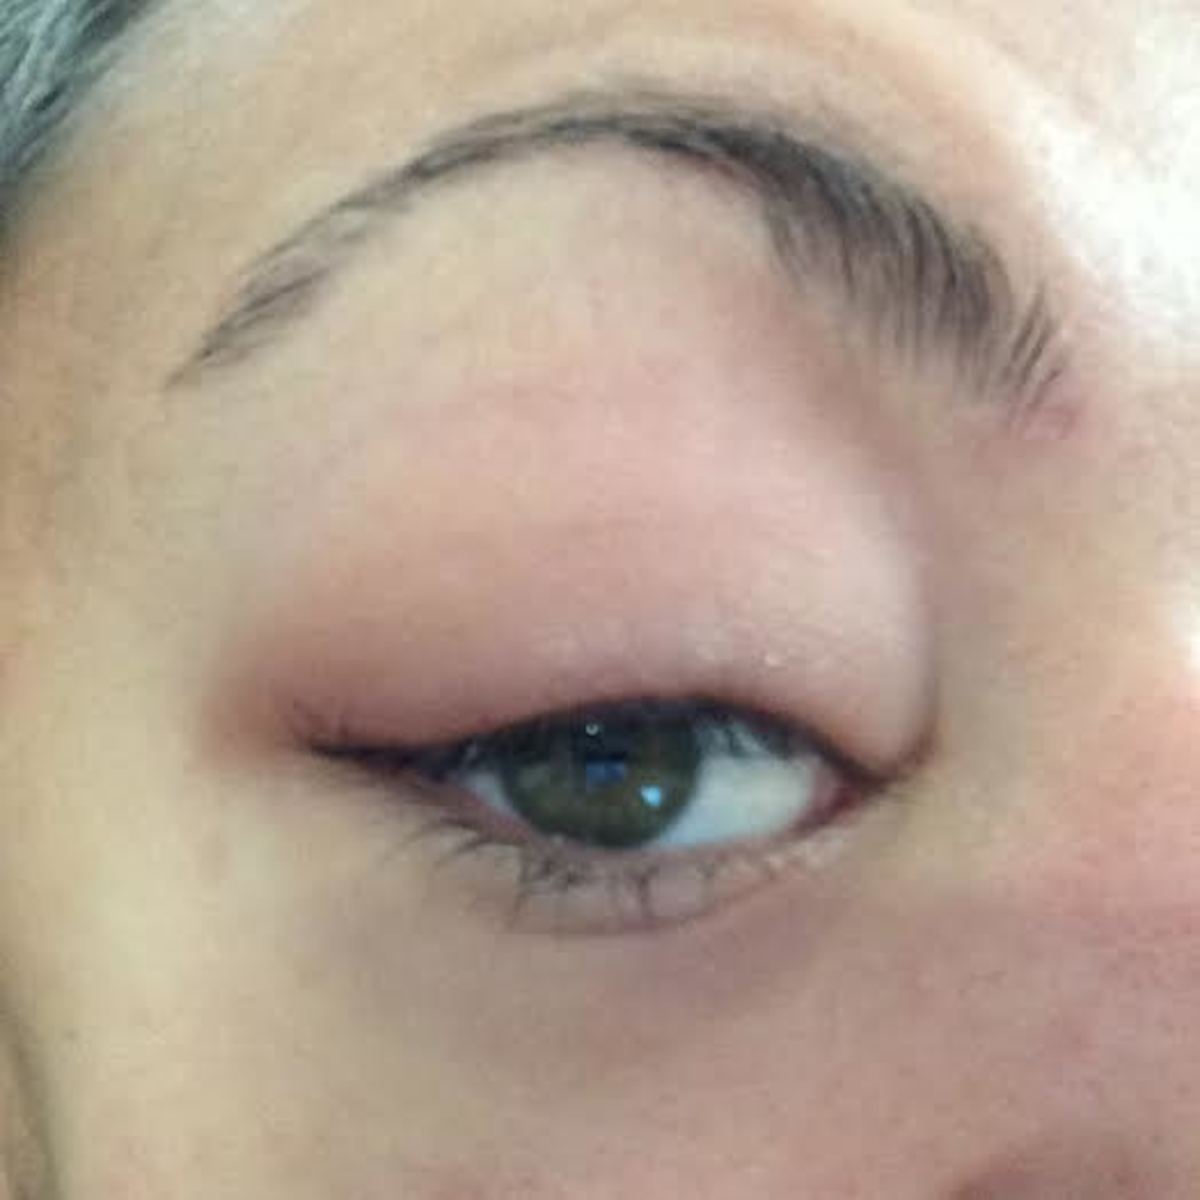 What a blepharitis flare-up looks like.